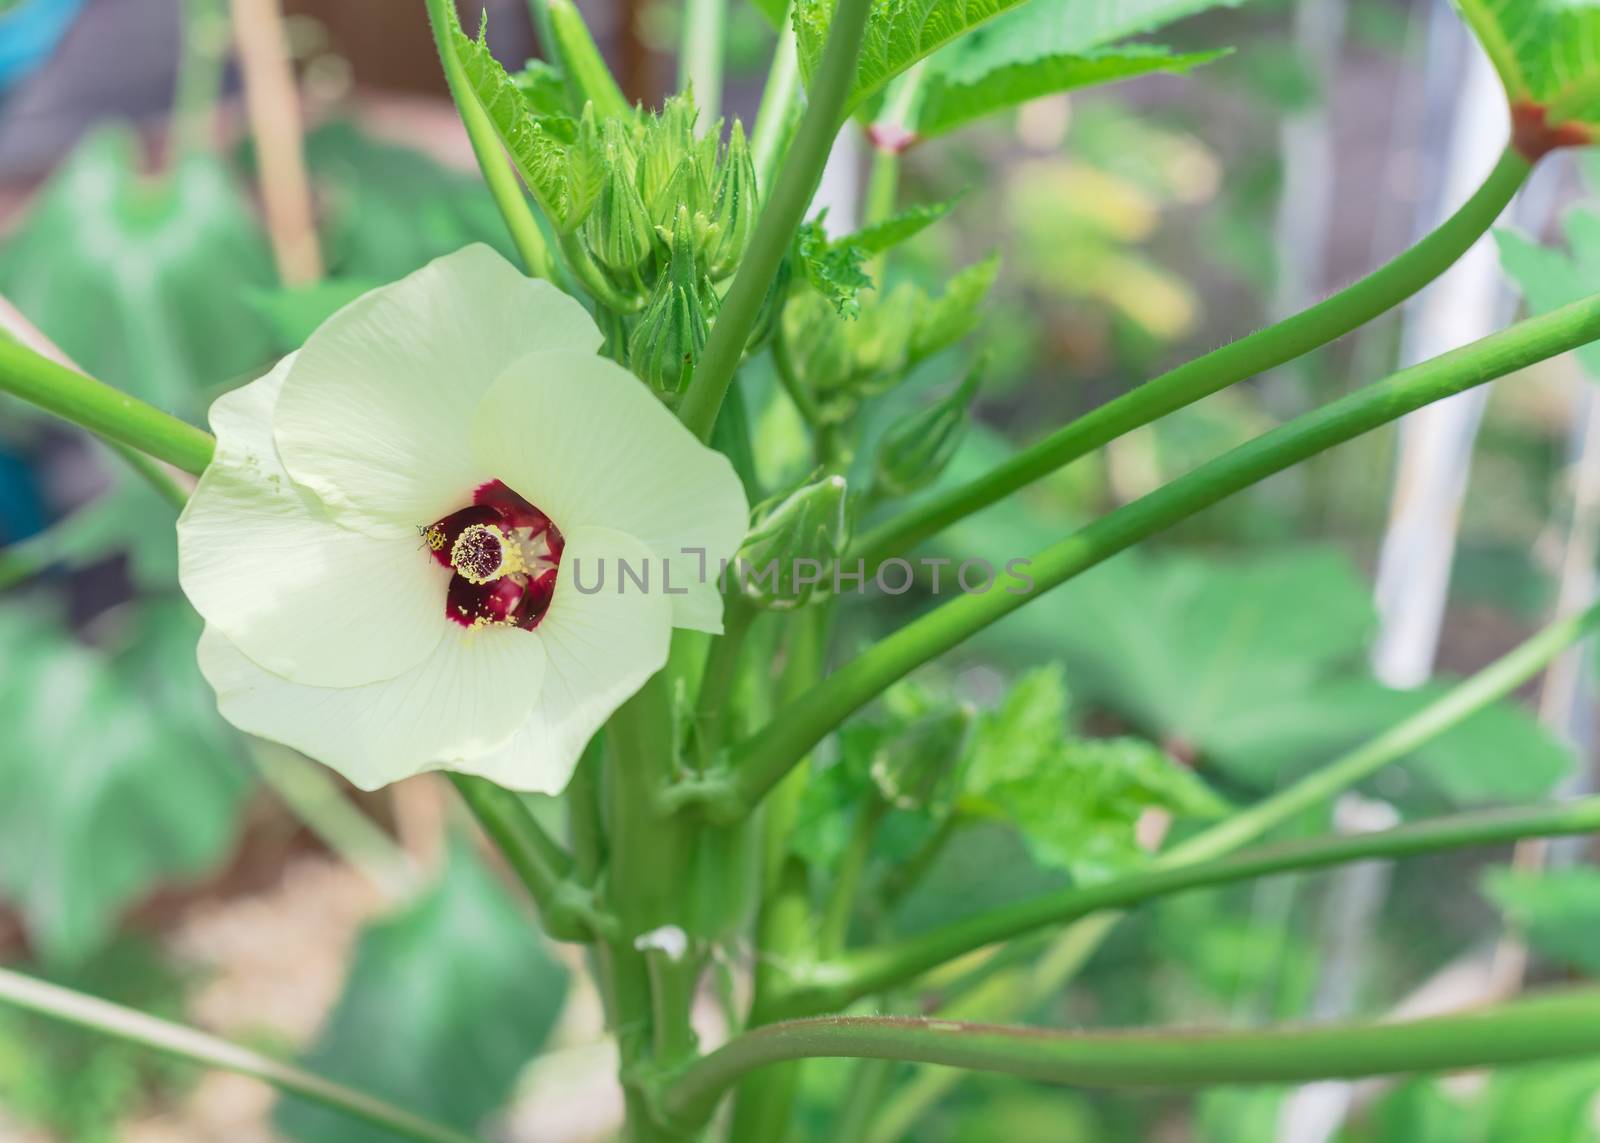 Blooming okra Abelmoschus esculentus flower and pods at raised bed garden near Dallas, Texas, USA by trongnguyen